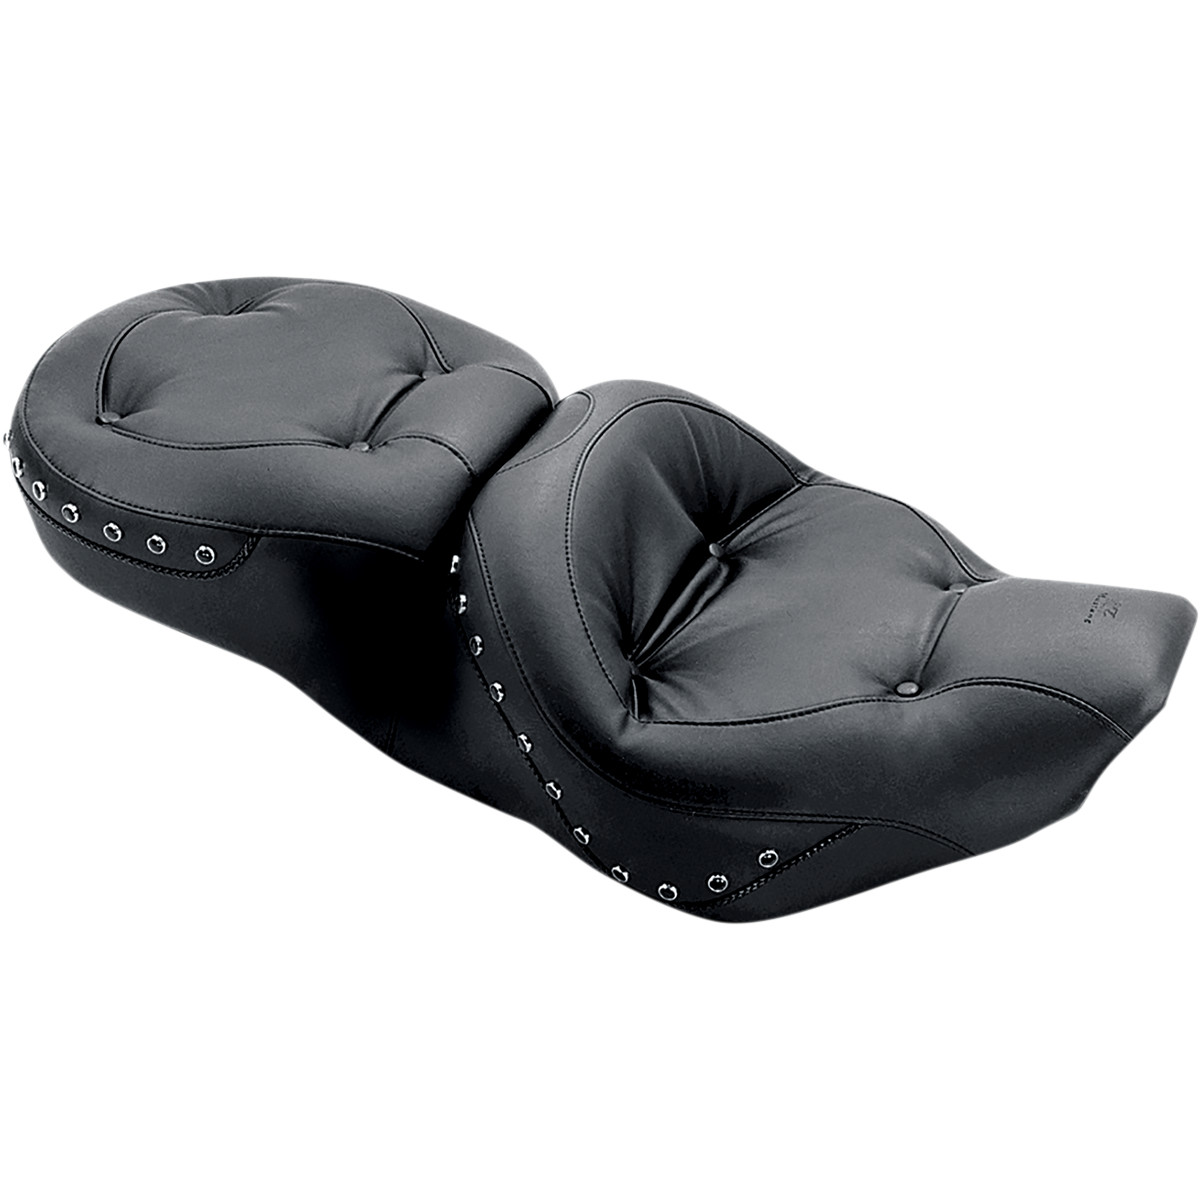 HARLEY DAVIDSON FLHR SEAT REGAL ONE-PIECE ULTRA TOURING 2-UP PILLOW TOP WITH BLACK STUBS